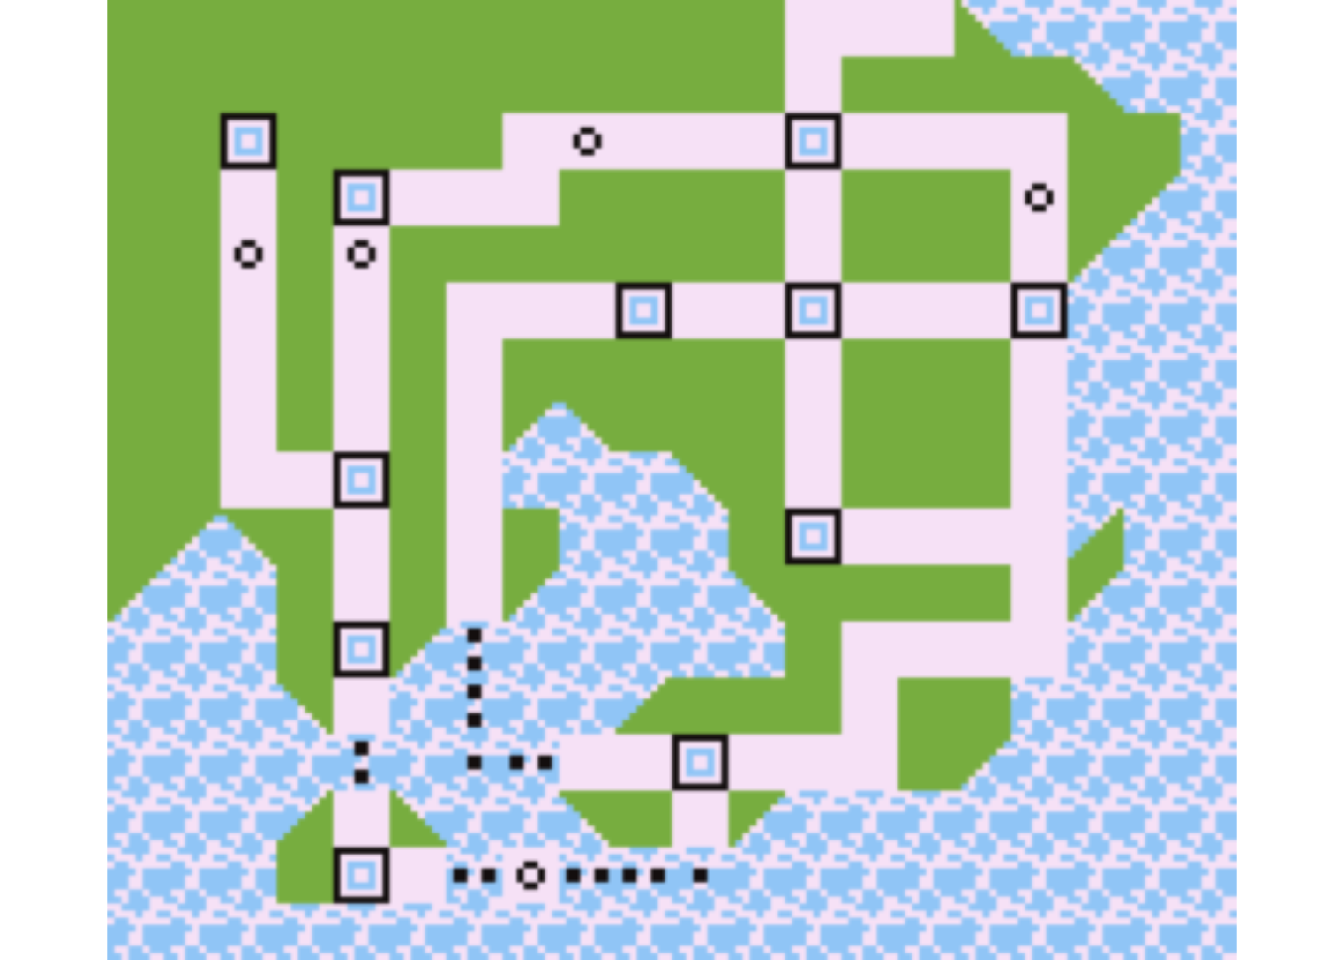 The simple, blocky Kanto town map from the original Pokemon game. Squares represent cities, circles are other points of interest, and there are routes connecting them. The location shows both land and sea.